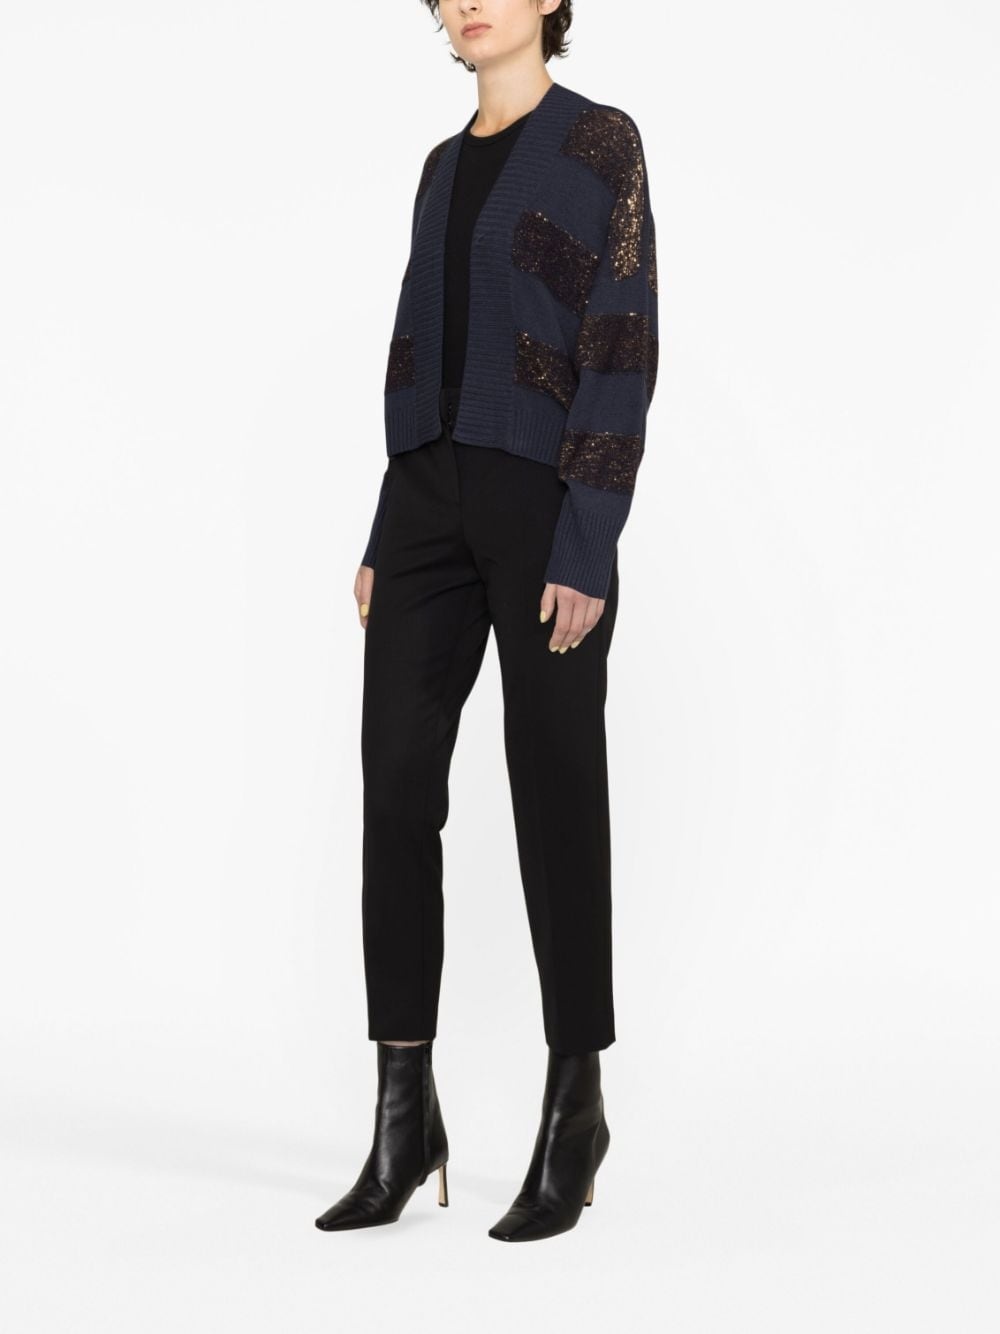 sequin-embellished knitted cardigan - 3